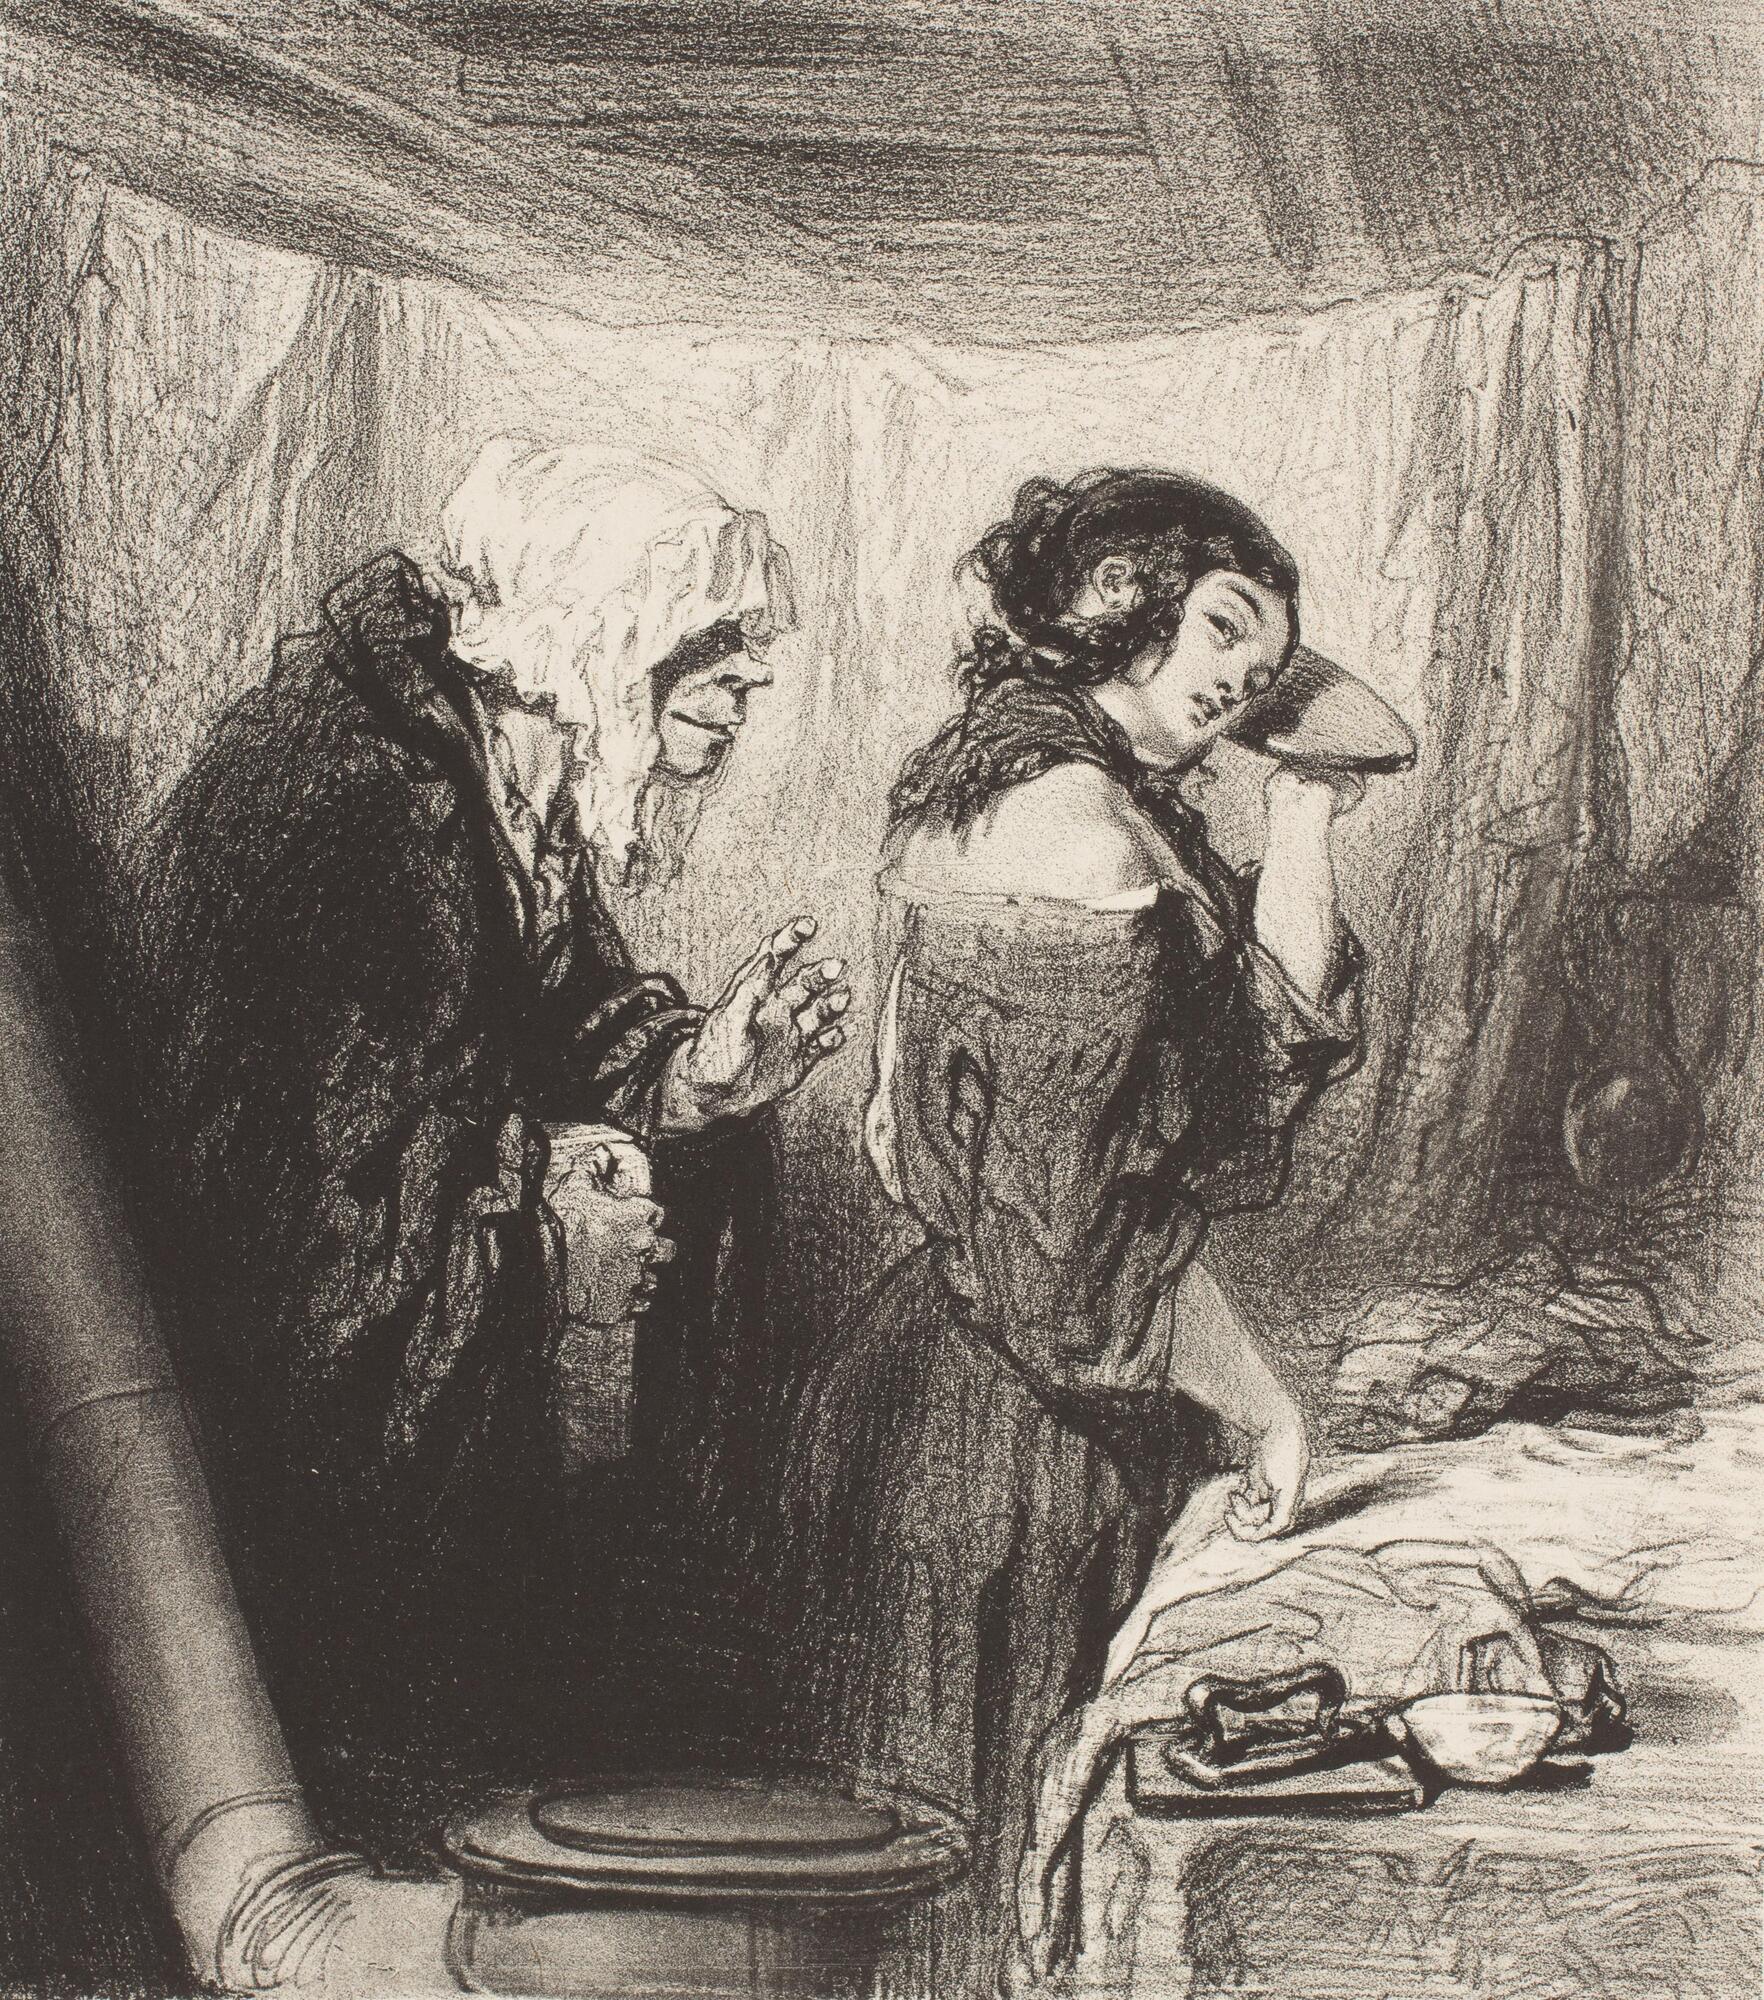 Draped room with a man in black cloak behind a young woman who is not paying any attention, combing her hair.